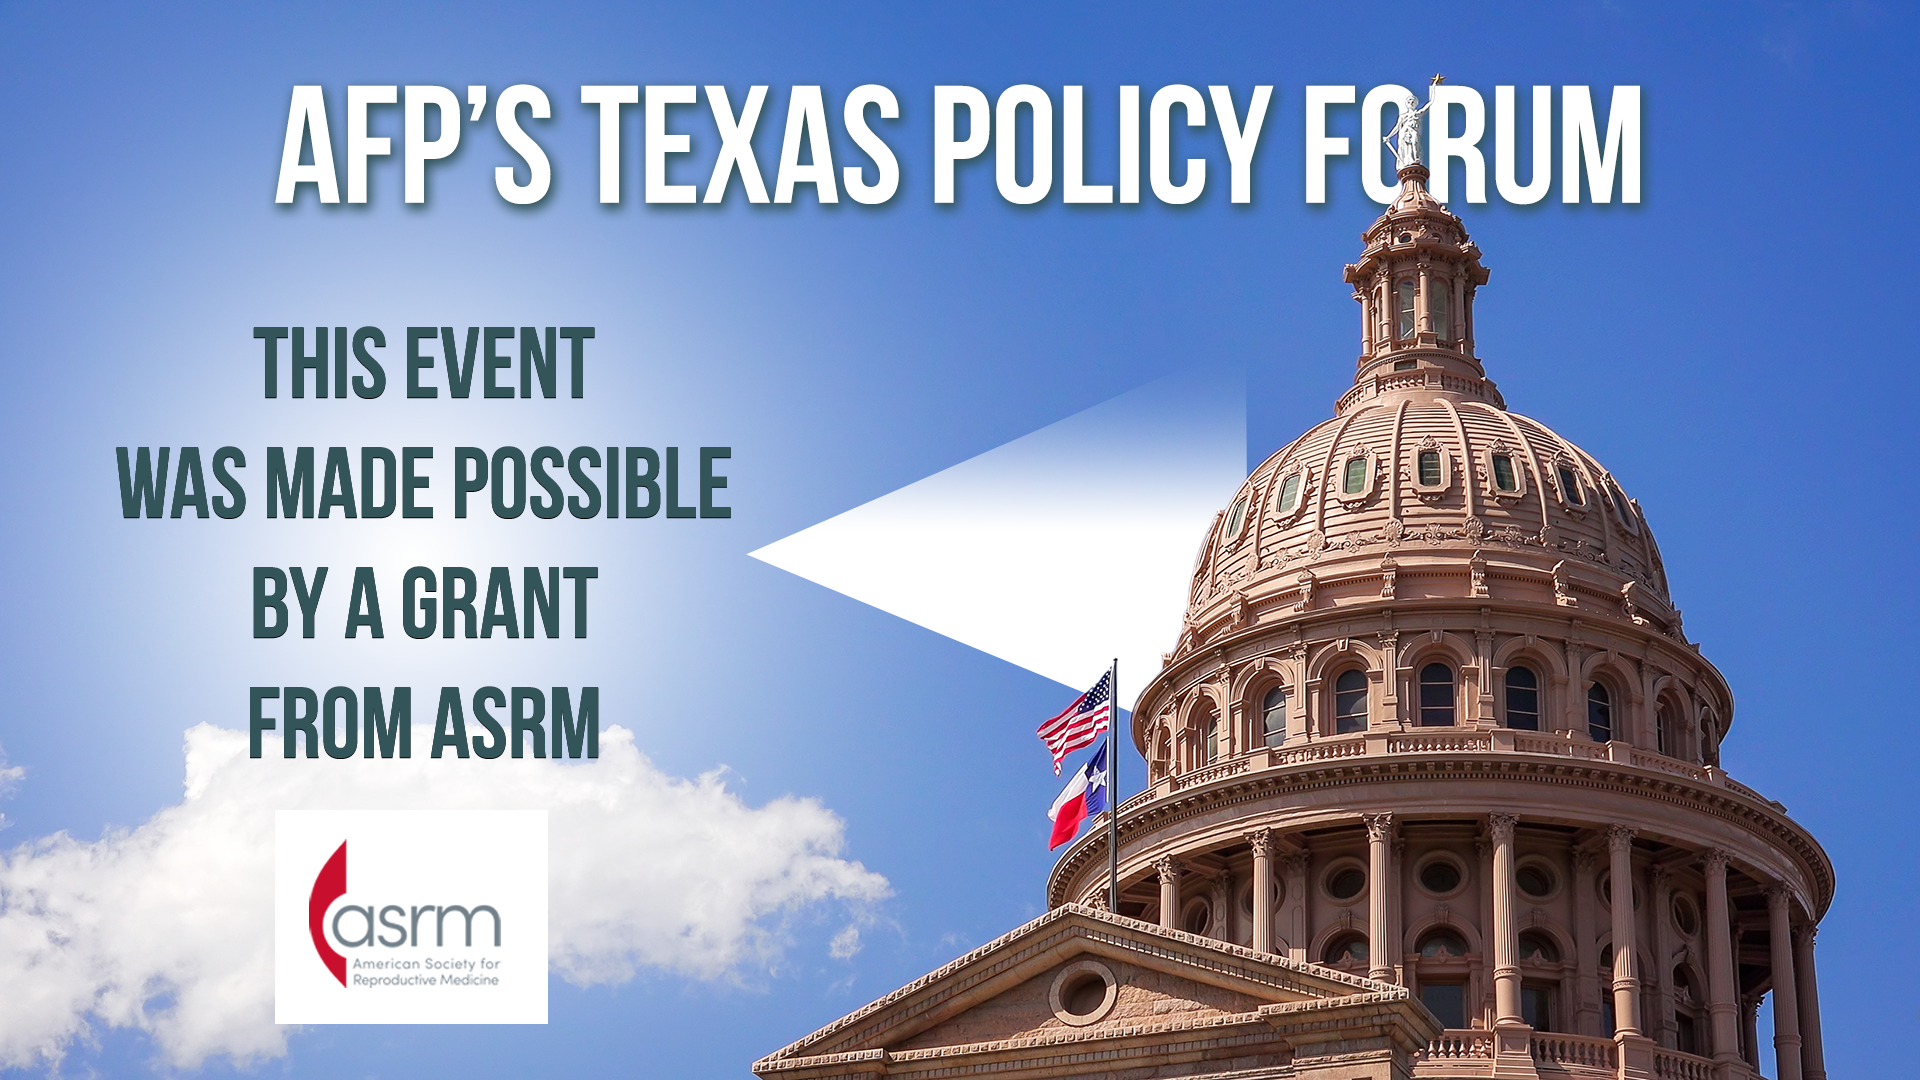 Readout: AFP's Texas Policy Forum